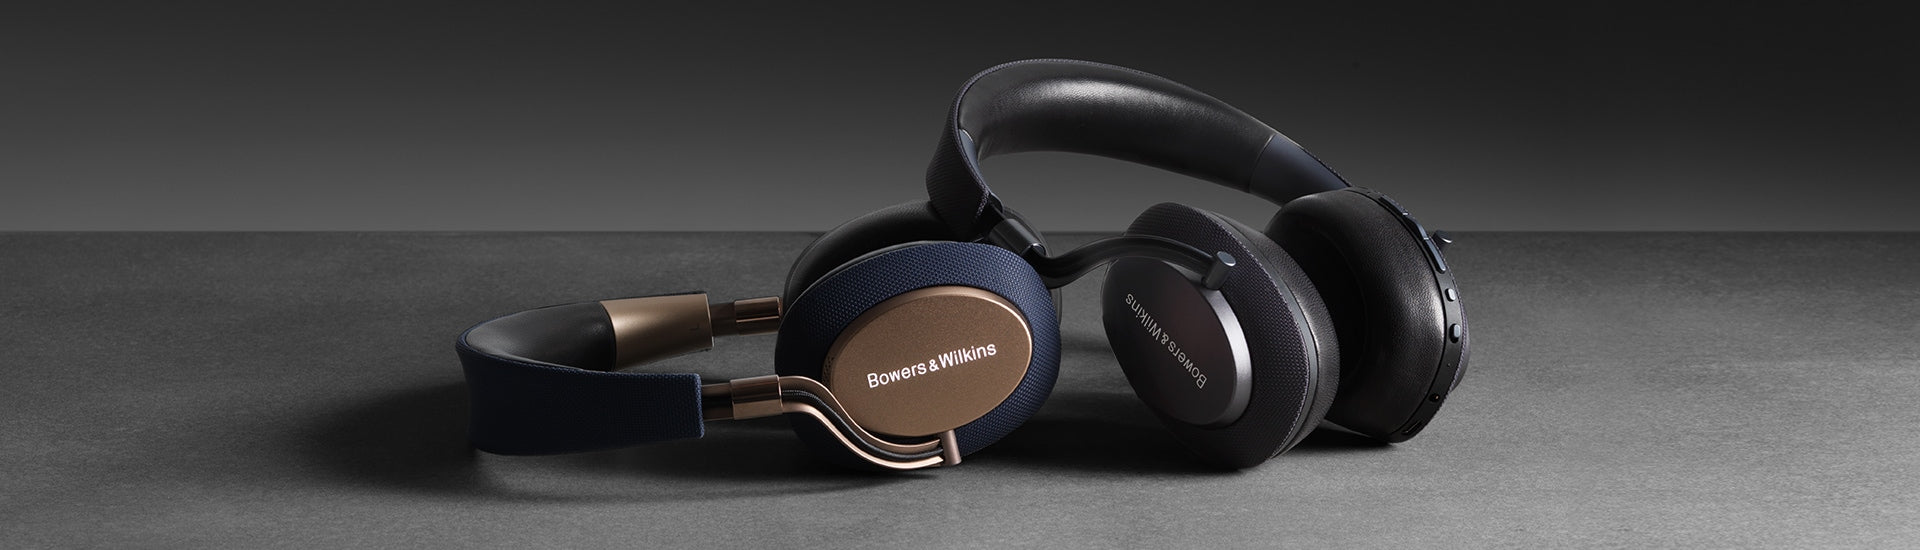 How to Choose the Right Pair of Headphones for You